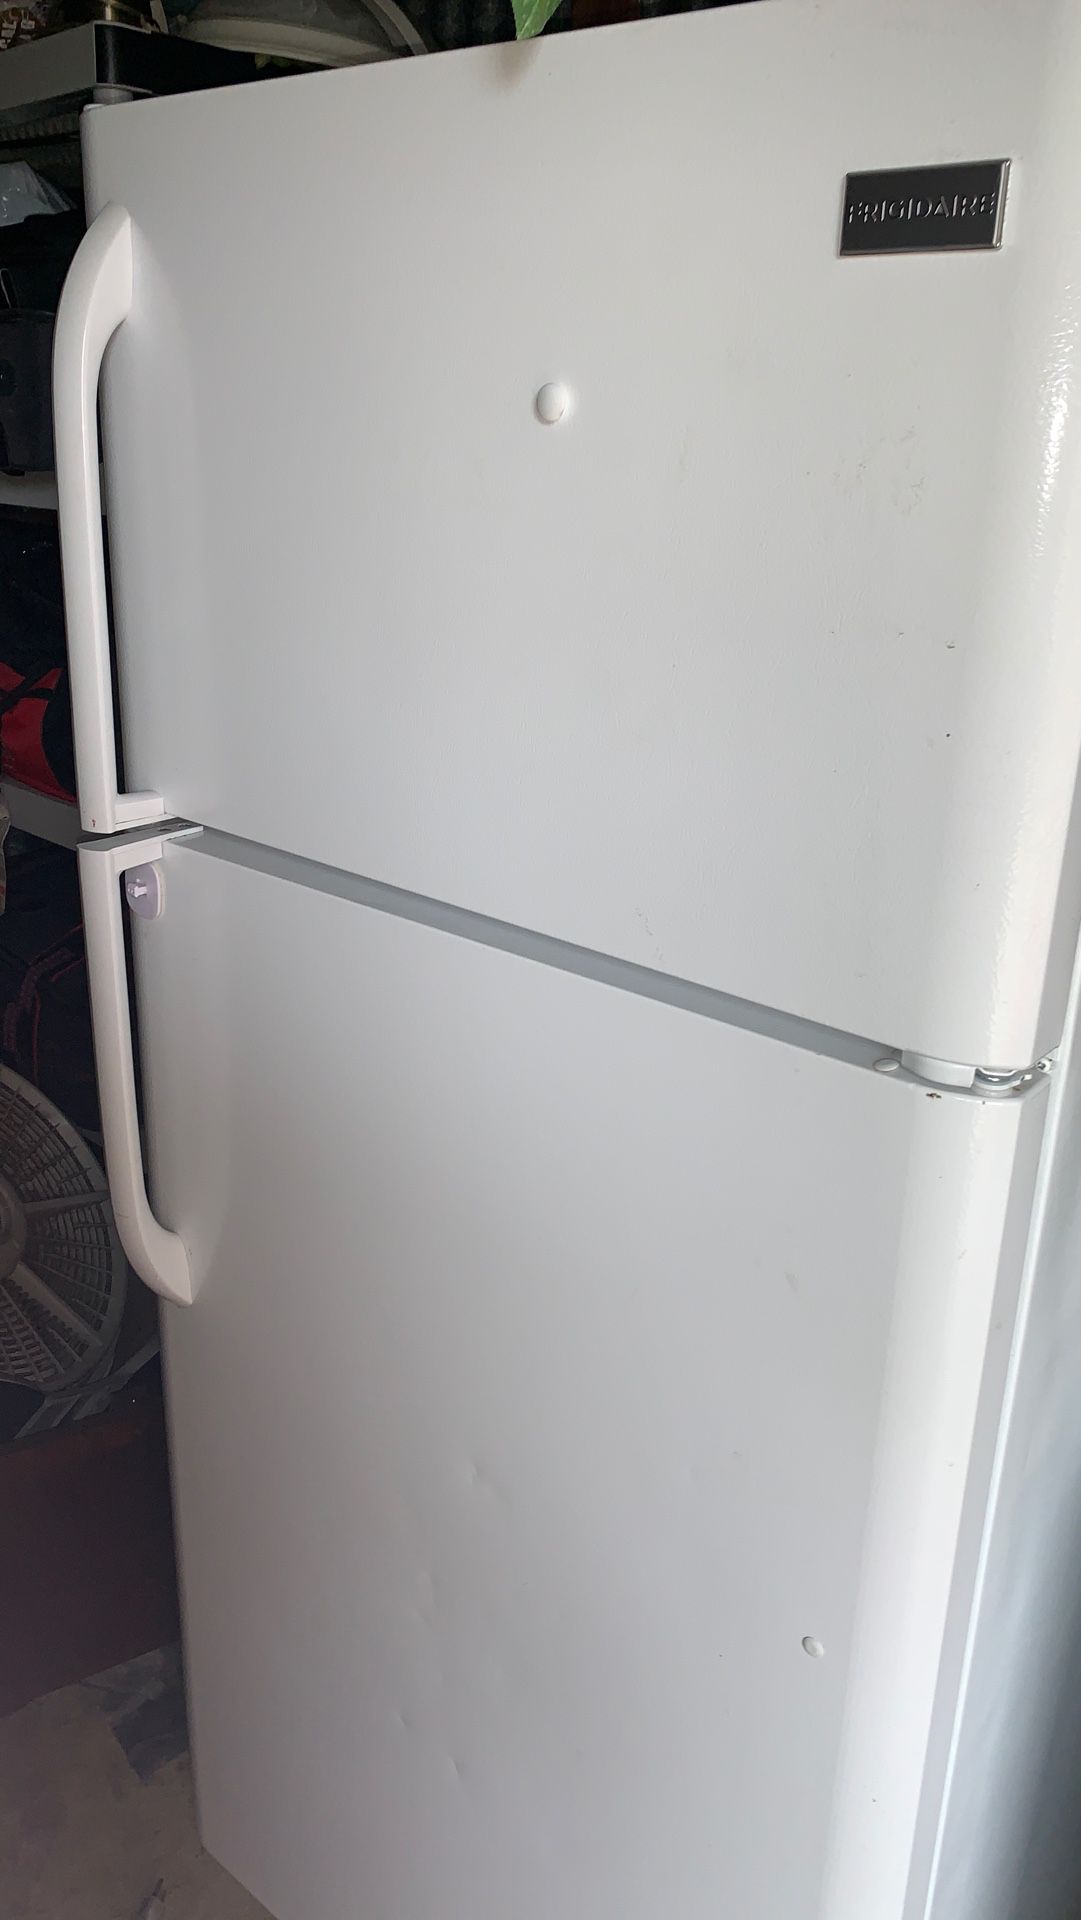 Extra clean Apartments size refrigerator